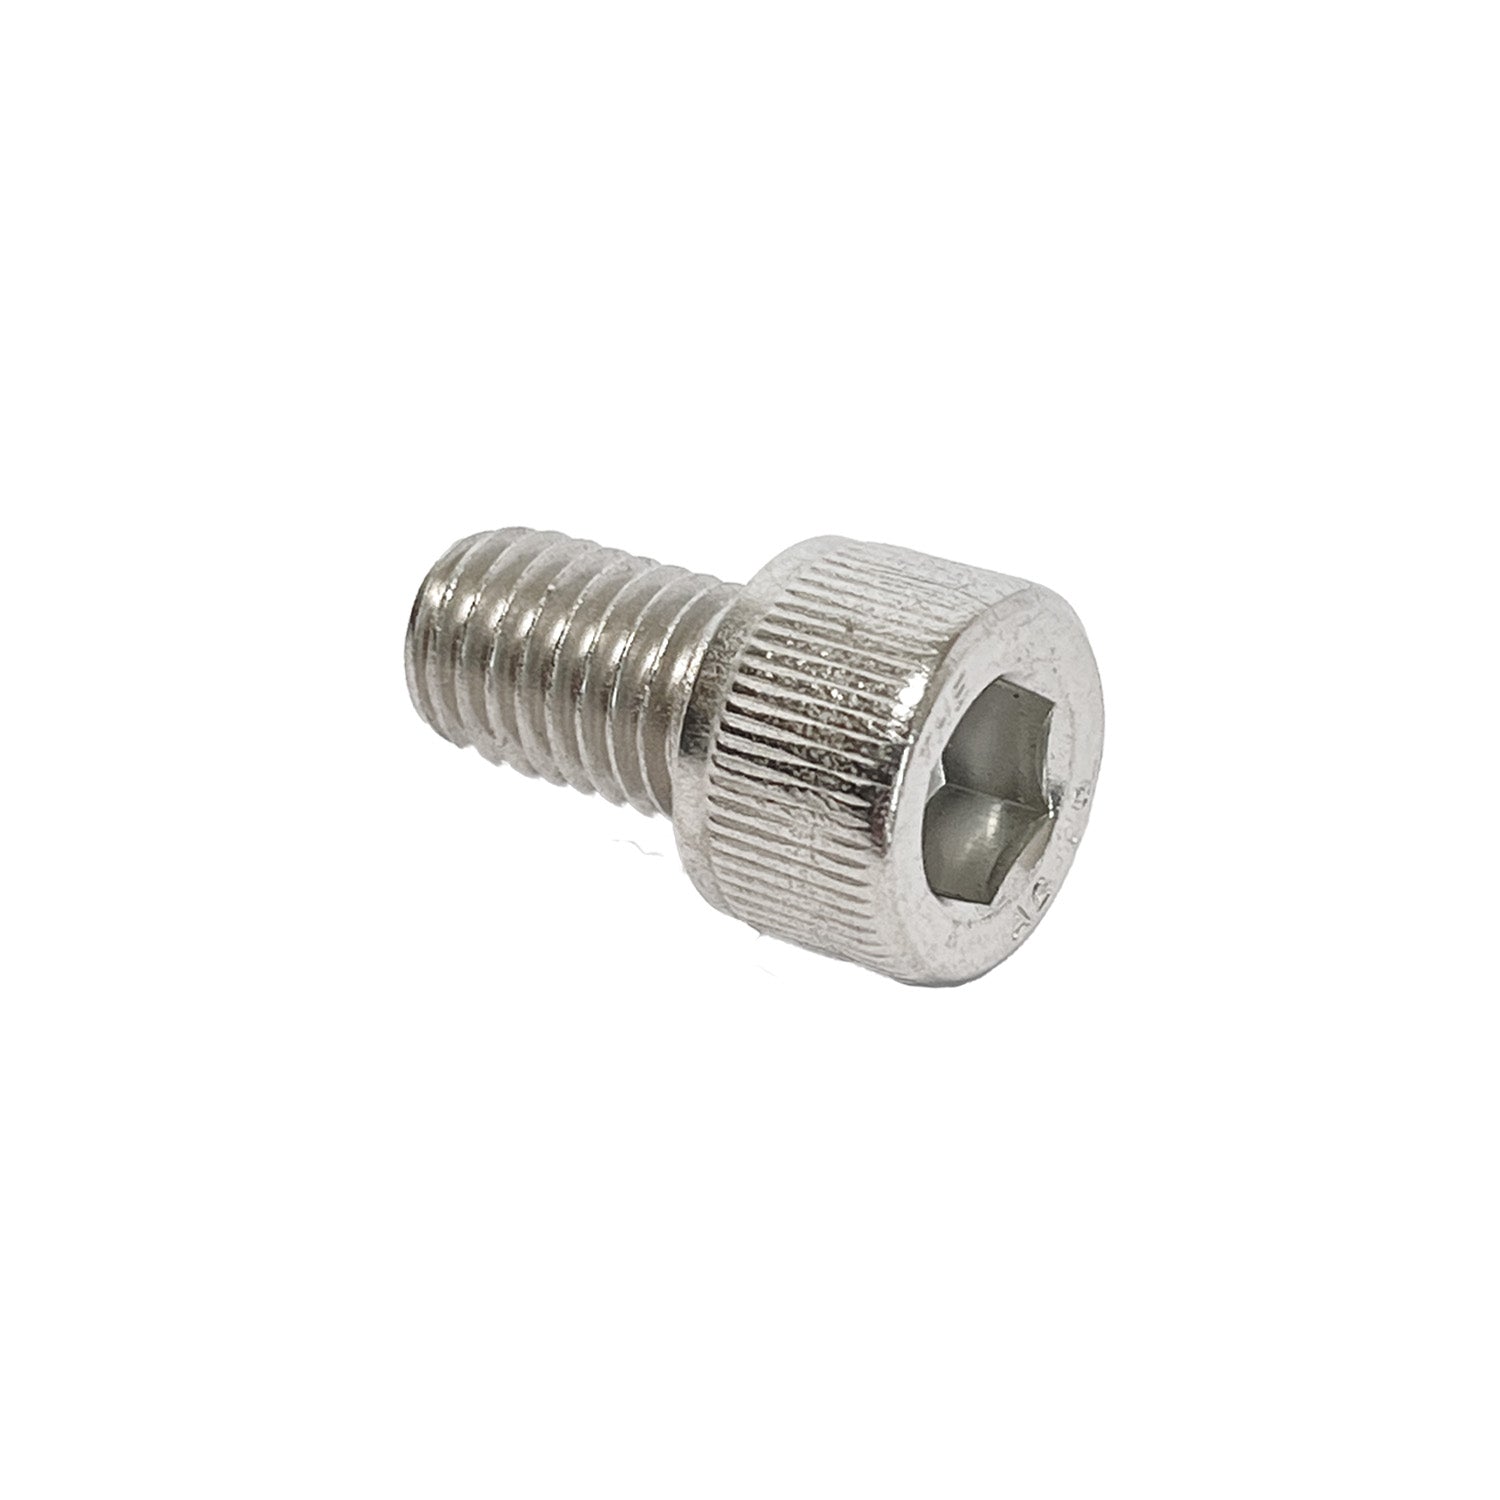 10mm x 16mm hex head bolt for manway hinge SS